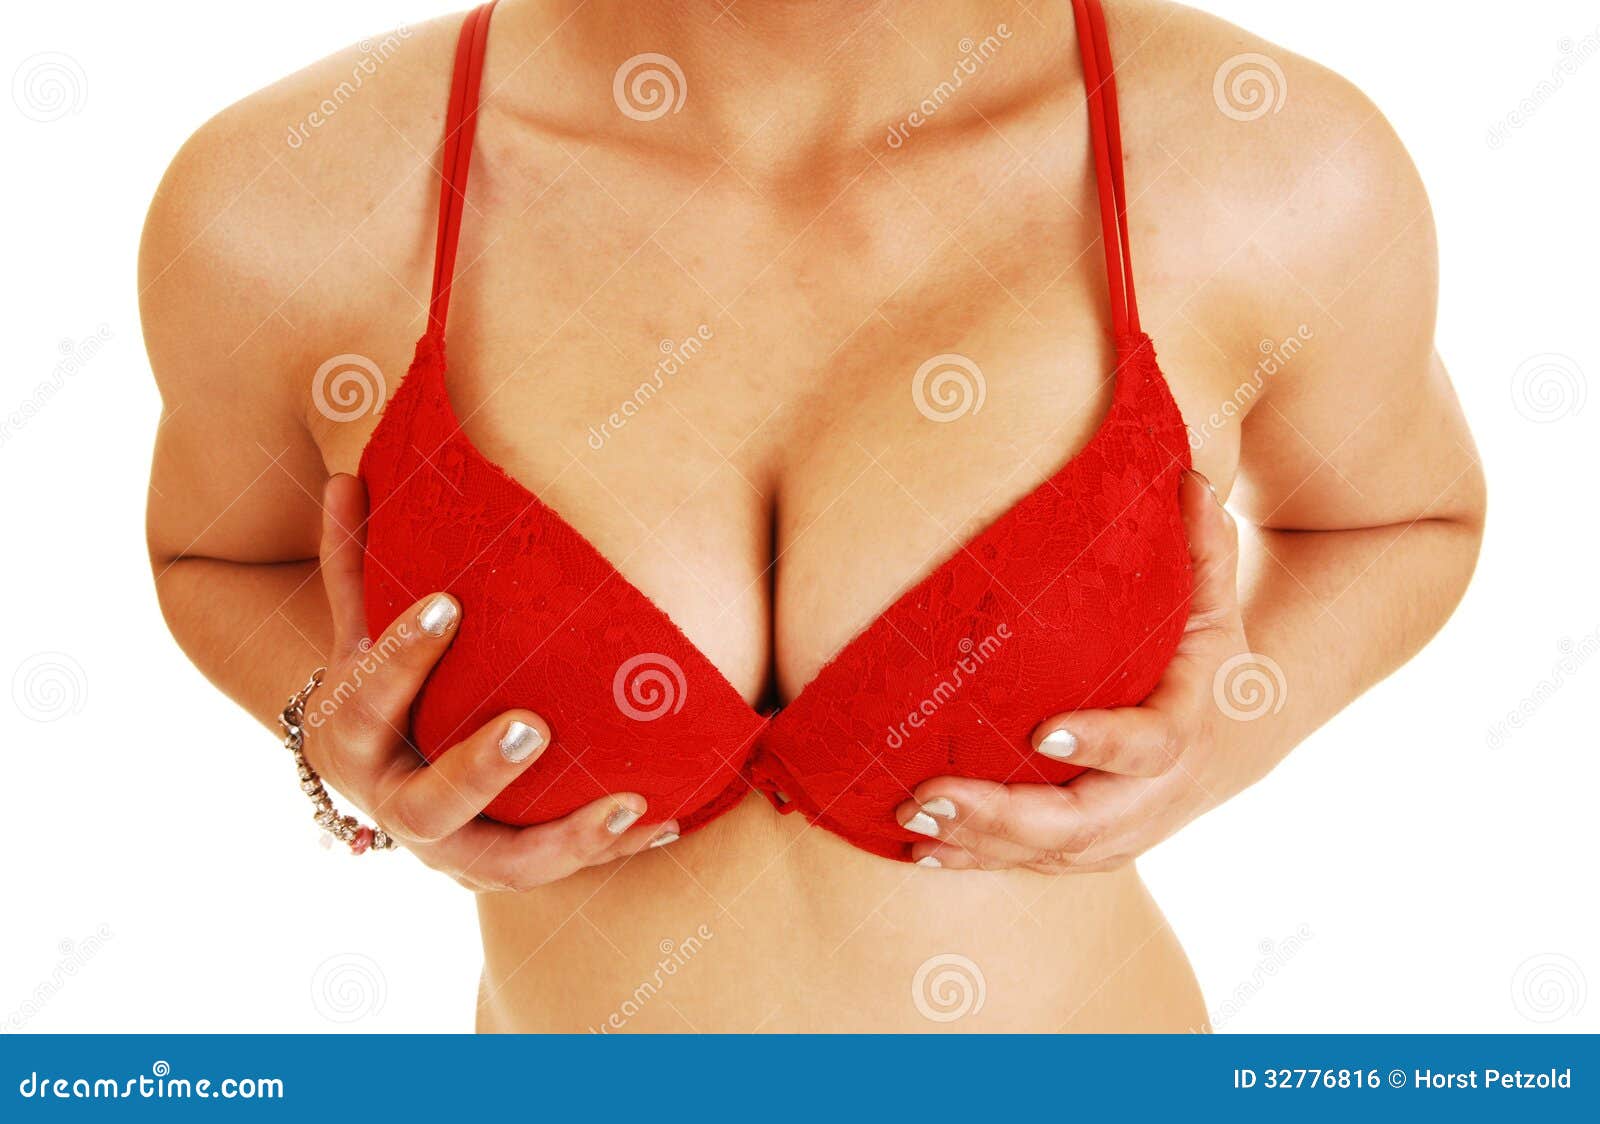 Holding Her Breasts Royalty Free Stock Image Image